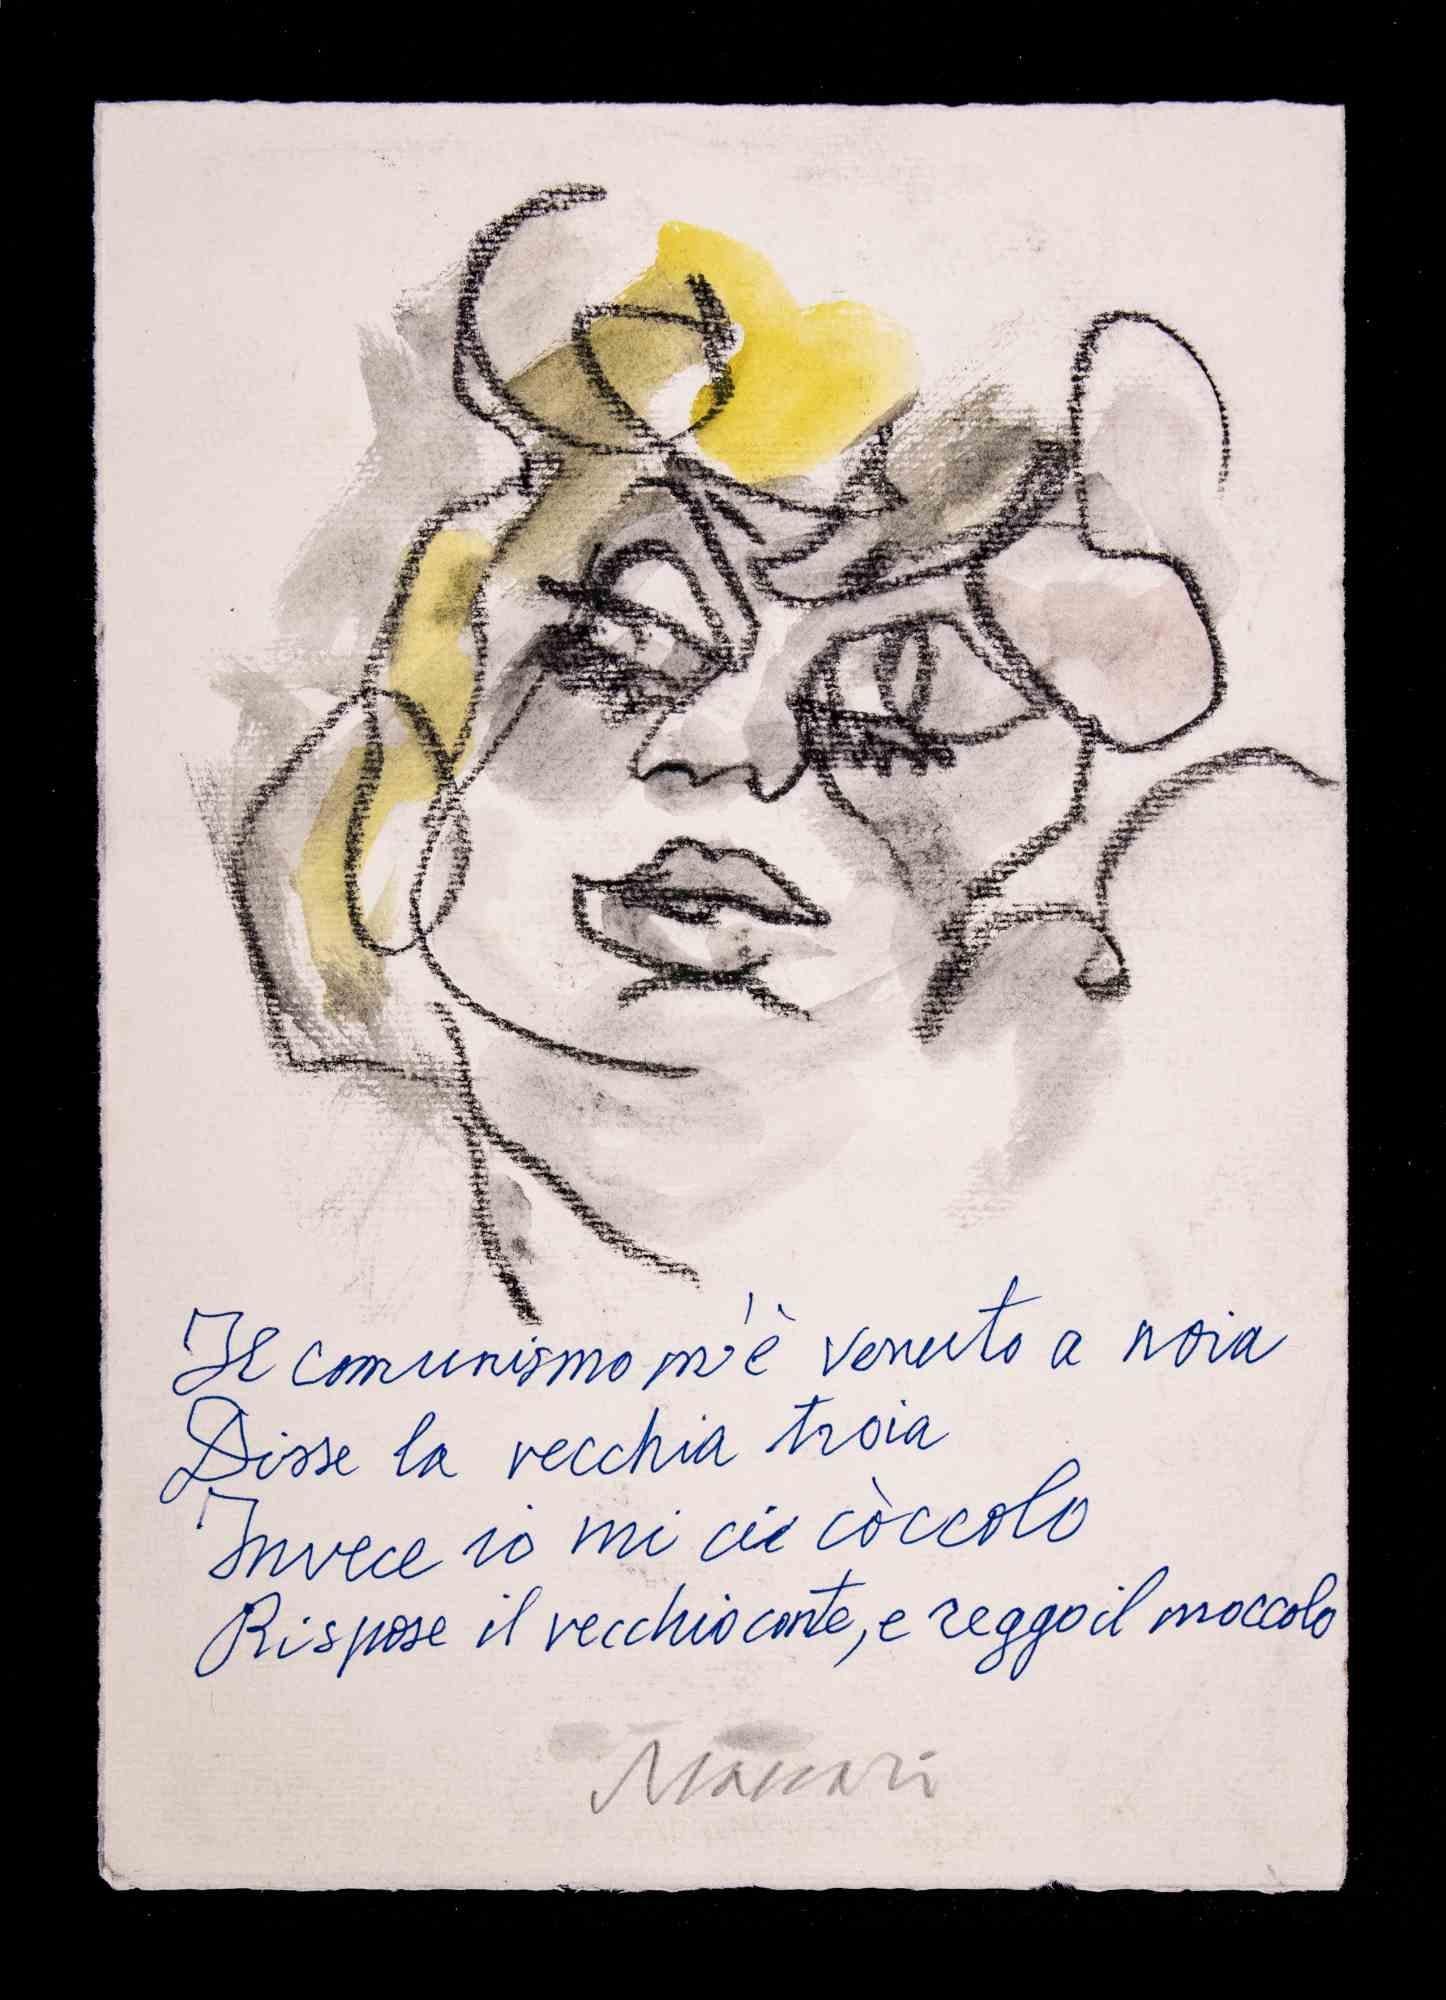 Communism Came to Me to Boredom is a charcoal and watercolor Drawing and Pastel realized by Mino Maccari  (1924-1989) in 1980s.

Hand-signed on the lower margin.

Good condition on a little cardboaard.

Mino Maccari (Siena, 1924-Rome, June 16, 1989)